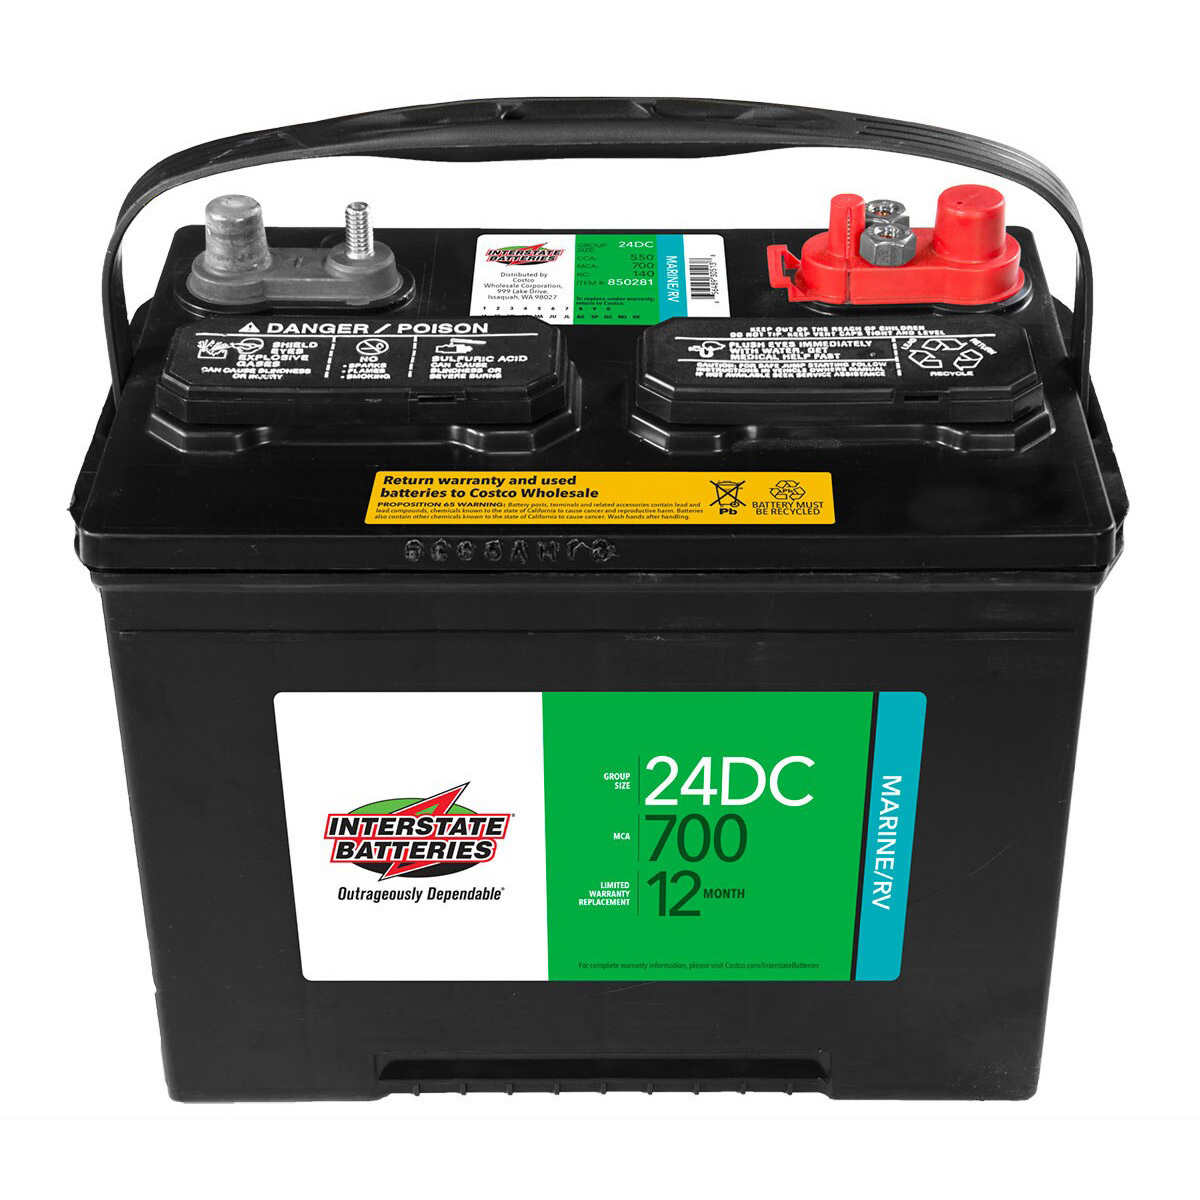 Costco Car Battery Reviews musicforruby